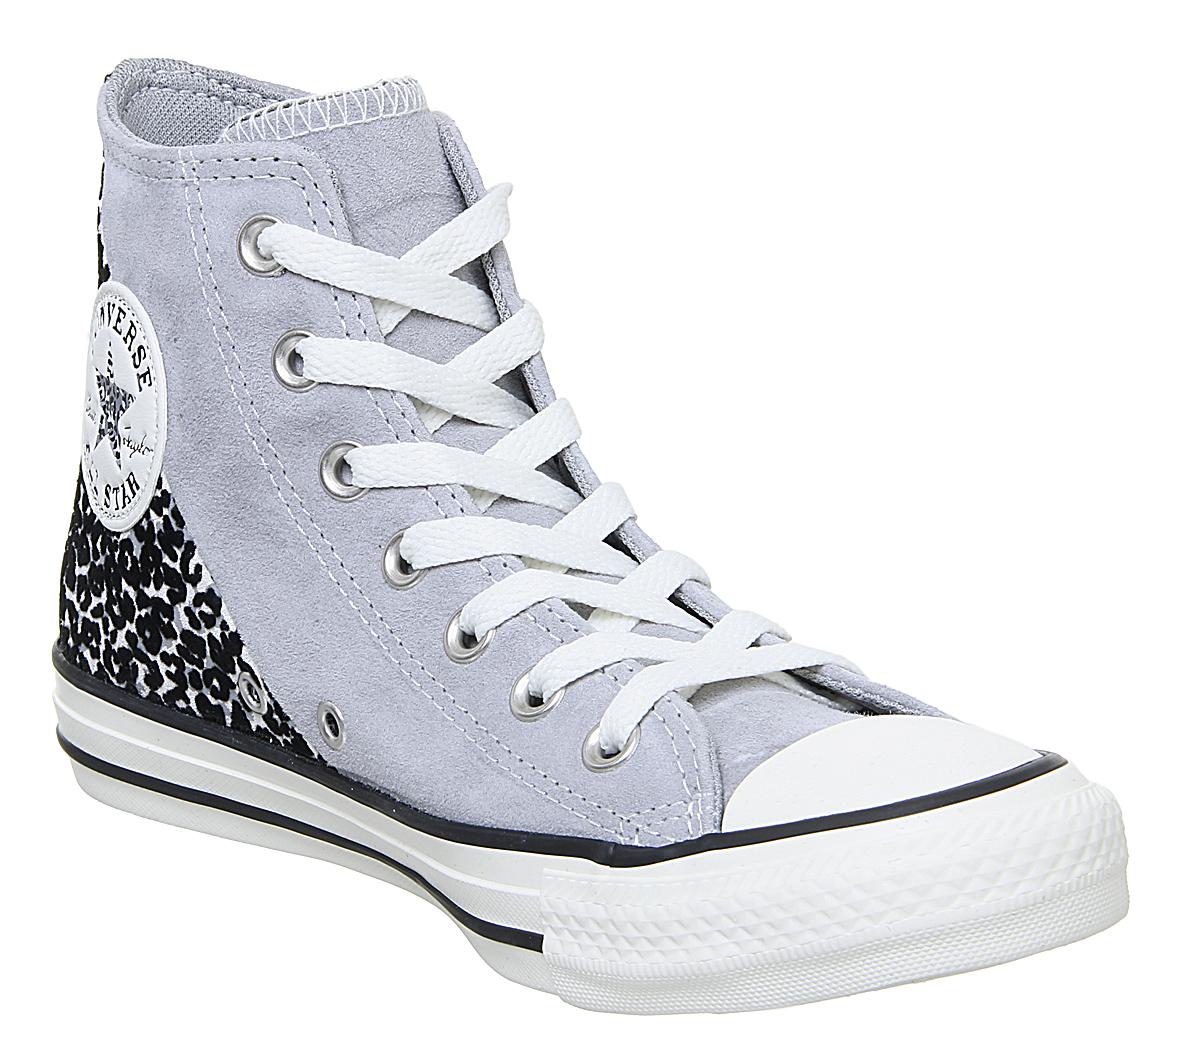 Converse Converse All Star Hi Trainers Dolphin Egret Black Animal Split  Panel Exclusive - Hers trainers